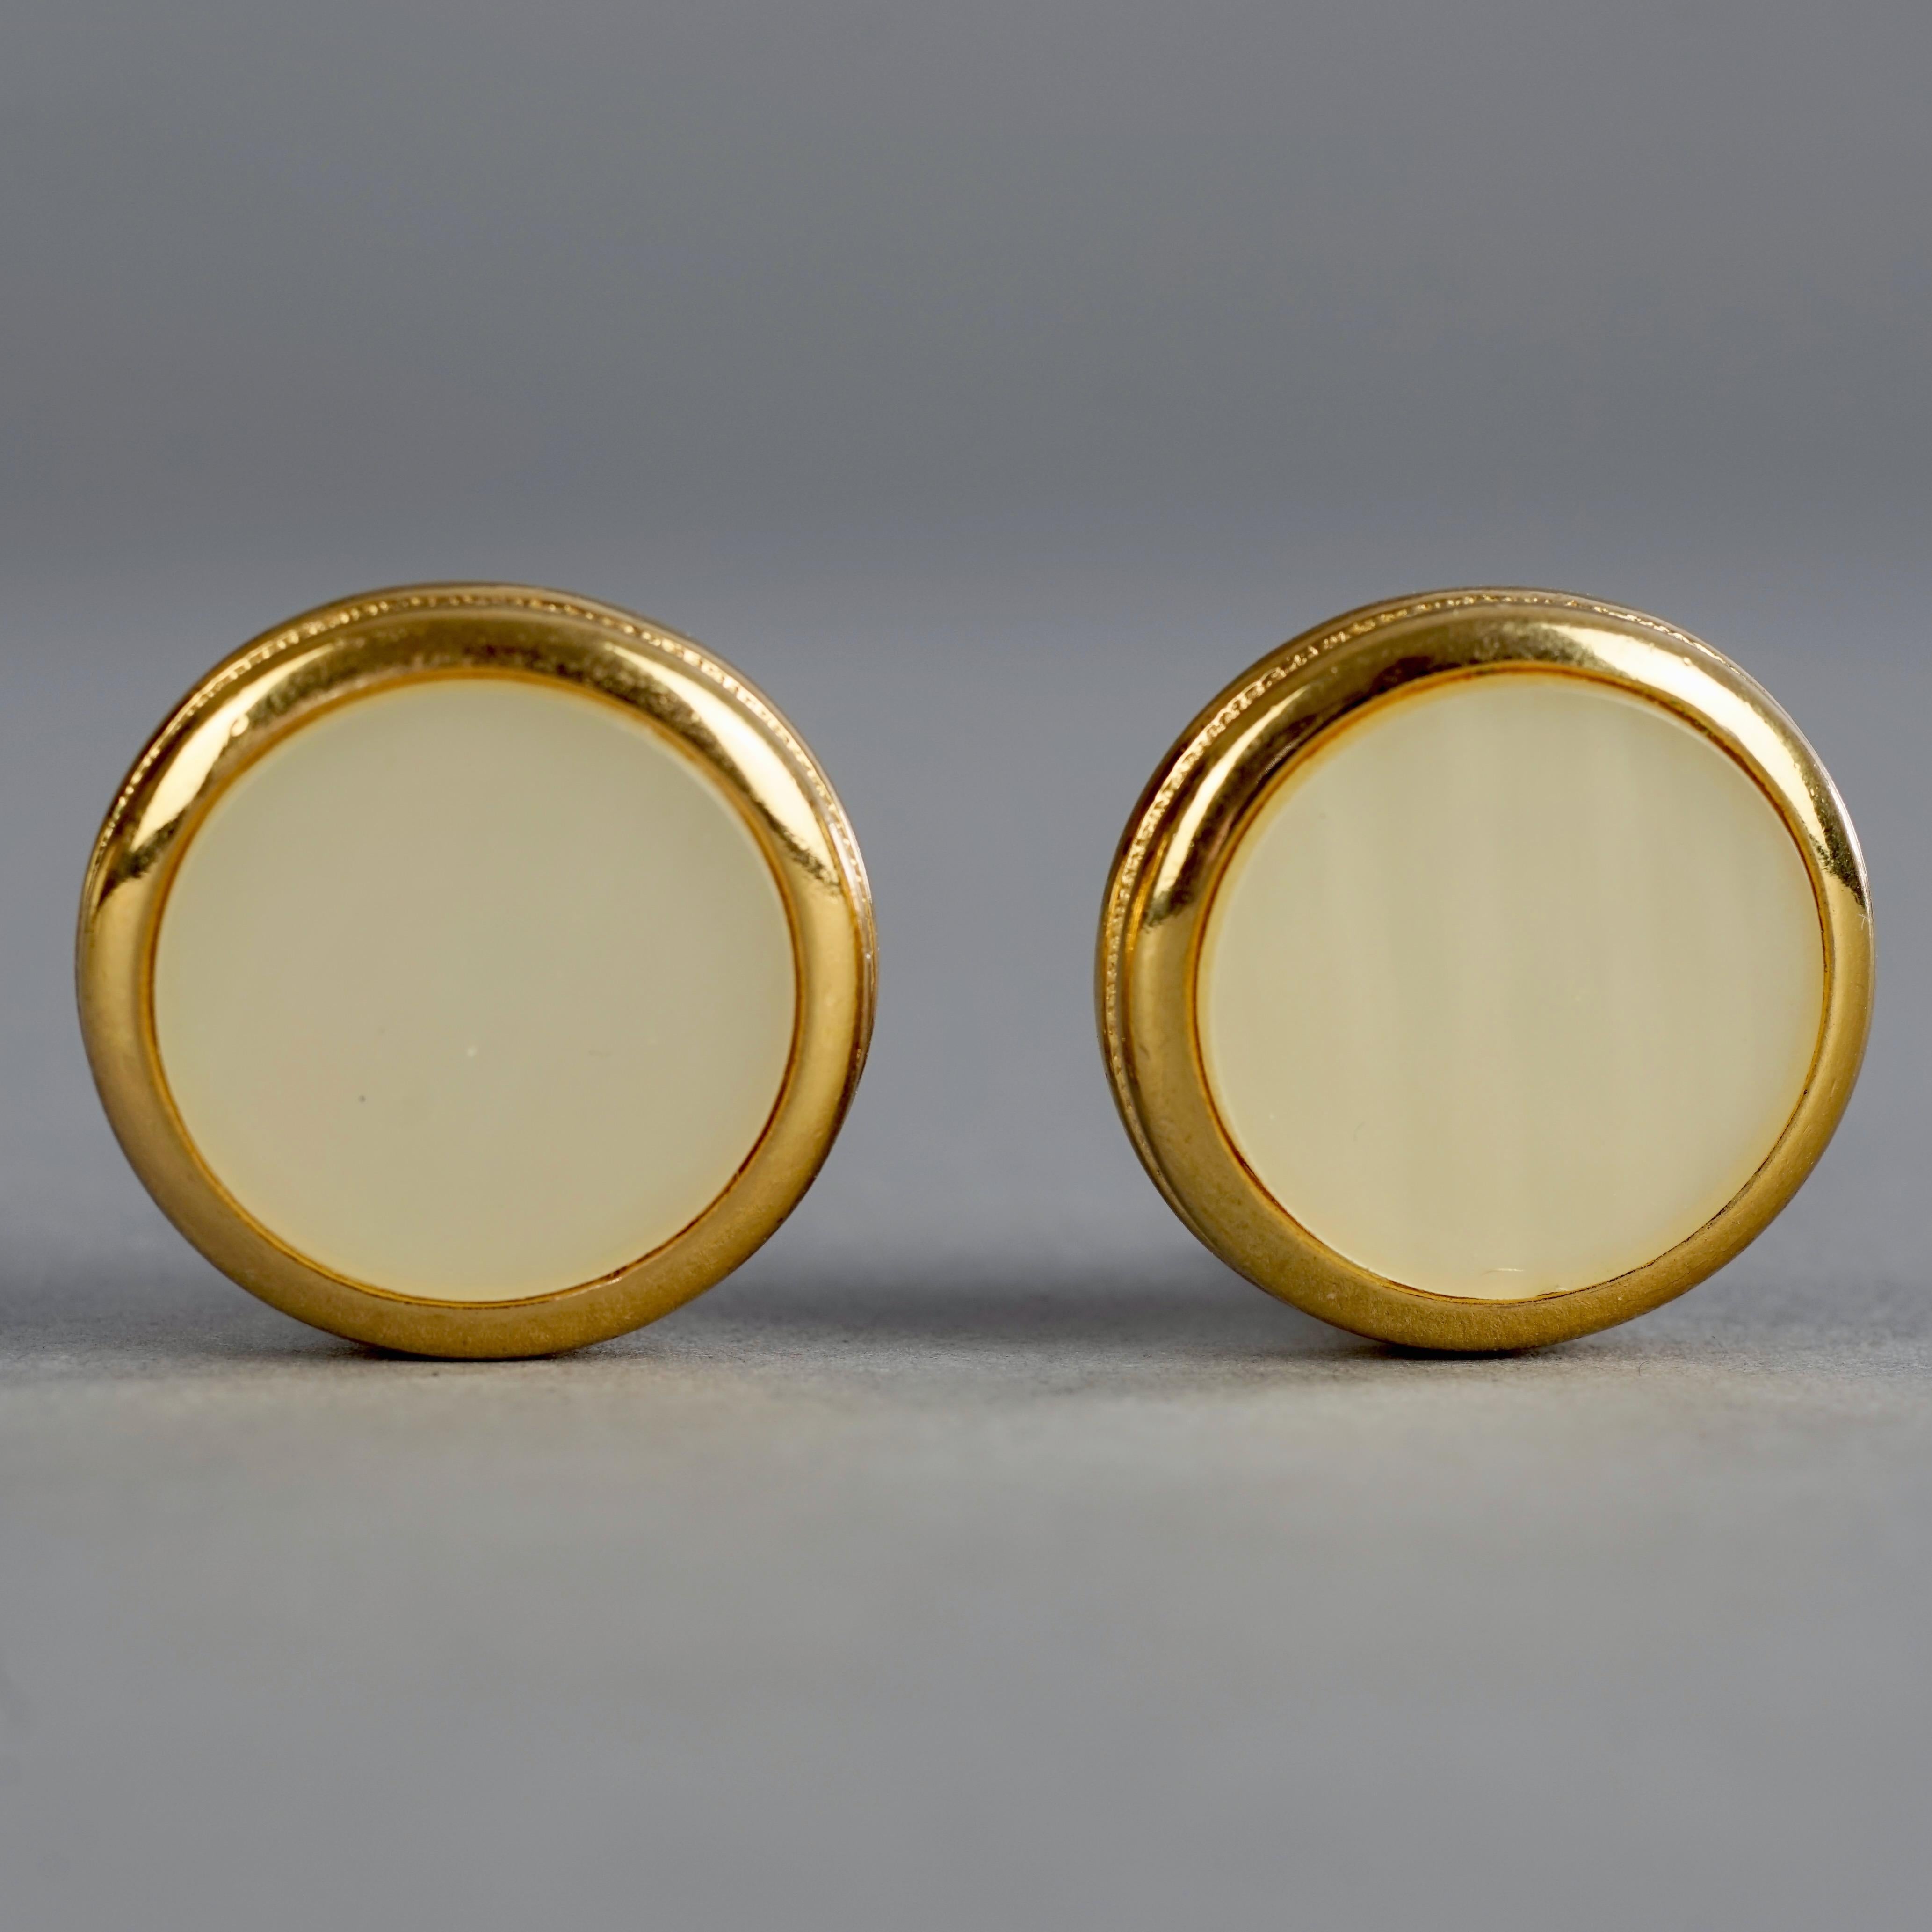 Vintage YVES SAINT LAURENT Ysl Nacre Disc Earrings In Excellent Condition For Sale In Kingersheim, Alsace